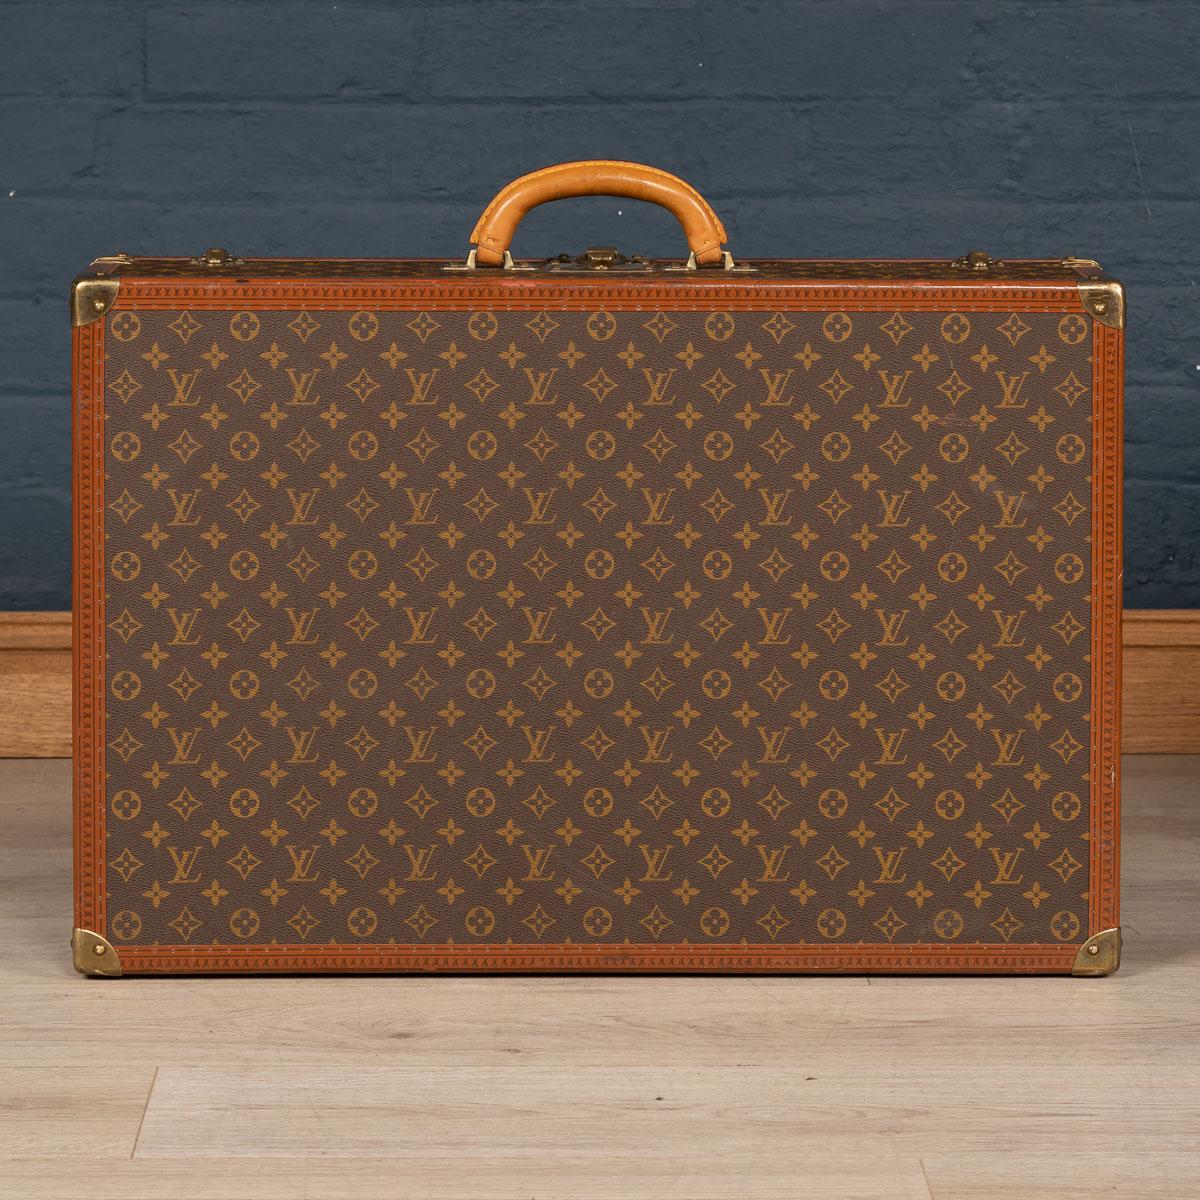 A charming Louis Vuitton hard-sided case, second half of the 20th century, the exterior finished in the famous monogram canvas with brass fittings. A great piece for use today or as an item for the home.

Please note that our interior pieces are